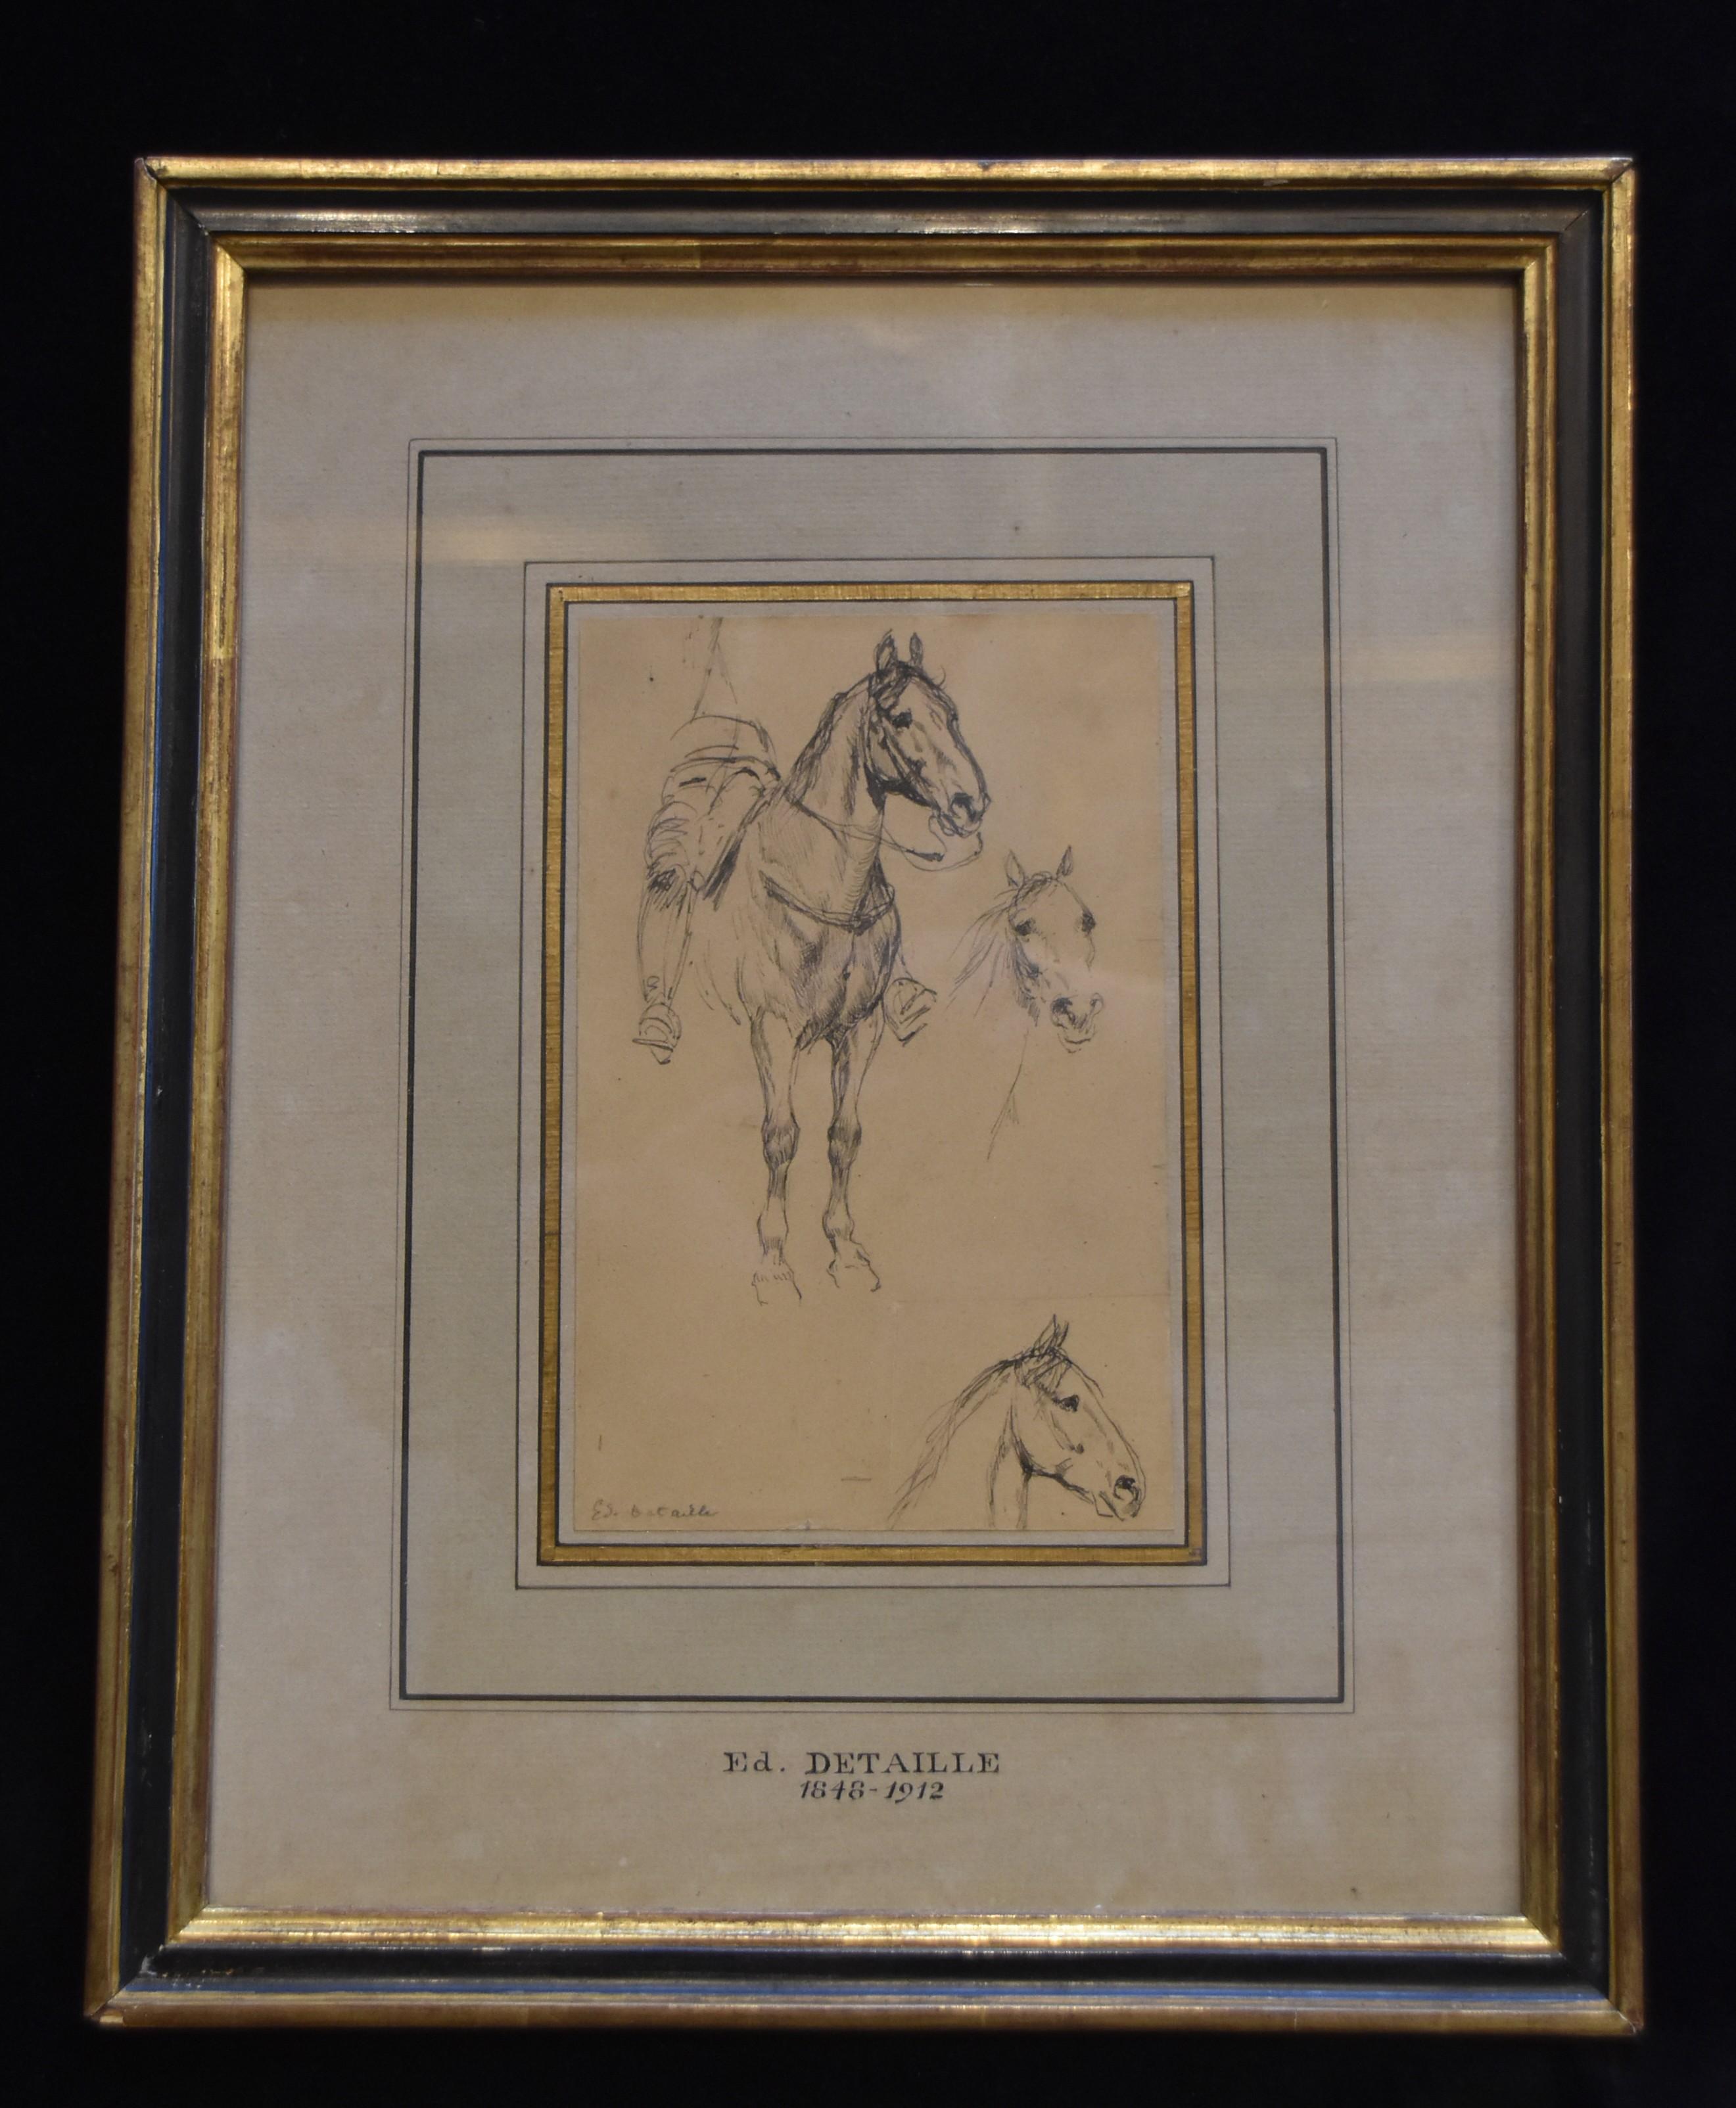 Edouard Detaille (1848 1912), Three studies of horses, original signed Drawing - Art by Jean Baptiste Édouard Detaille